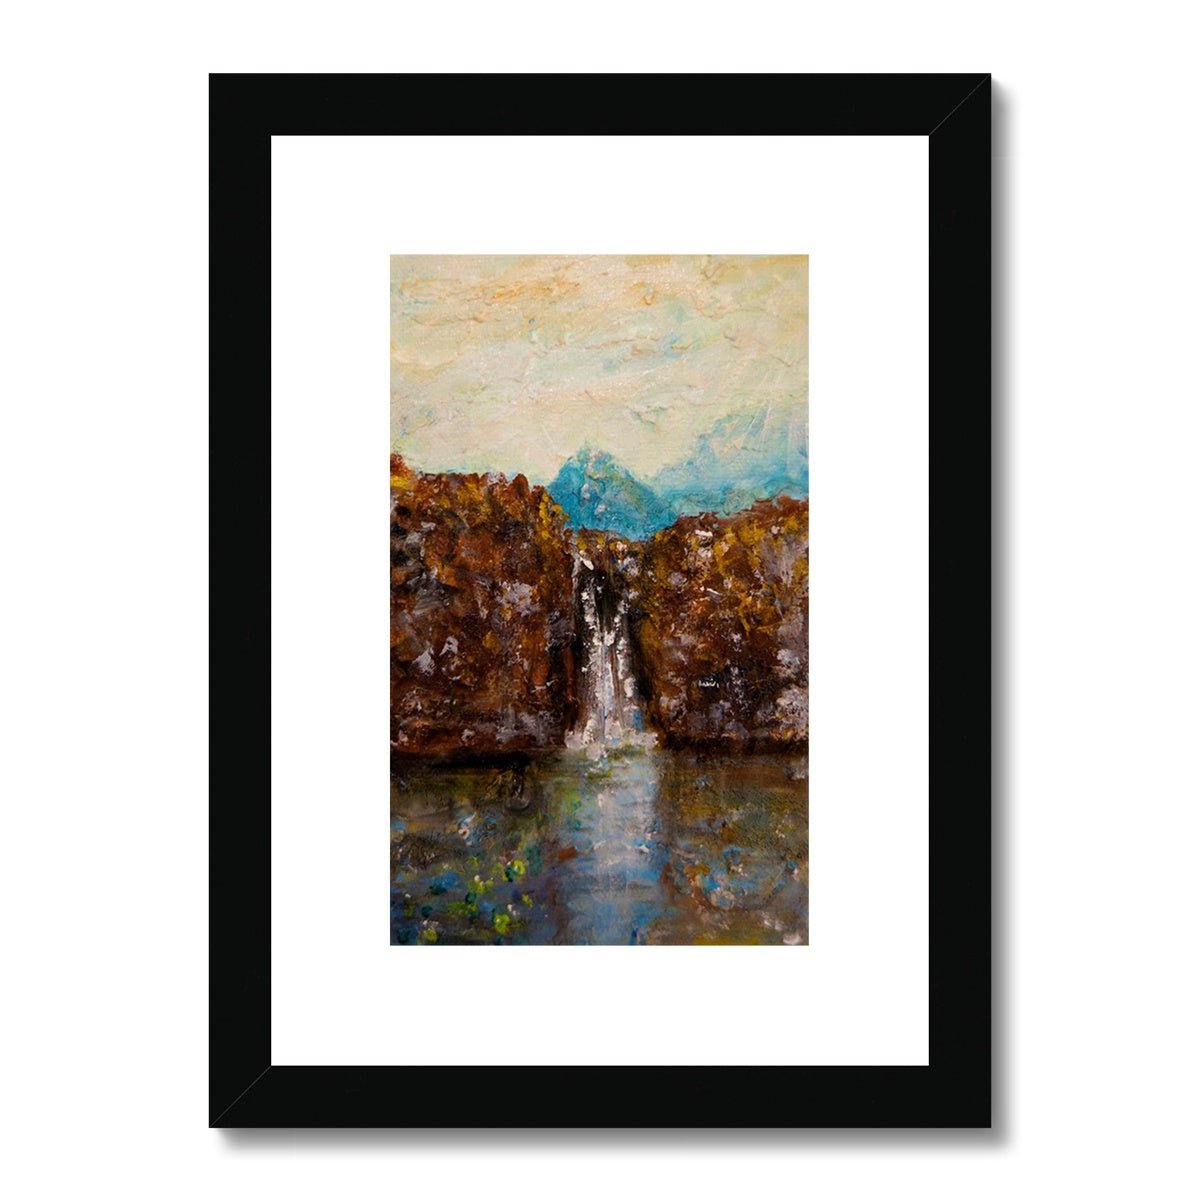 Skye Fairy Pools Painting | Framed & Mounted Prints From Scotland-Framed & Mounted Prints-Skye Art Gallery-A4 Portrait-Black Frame-Paintings, Prints, Homeware, Art Gifts From Scotland By Scottish Artist Kevin Hunter